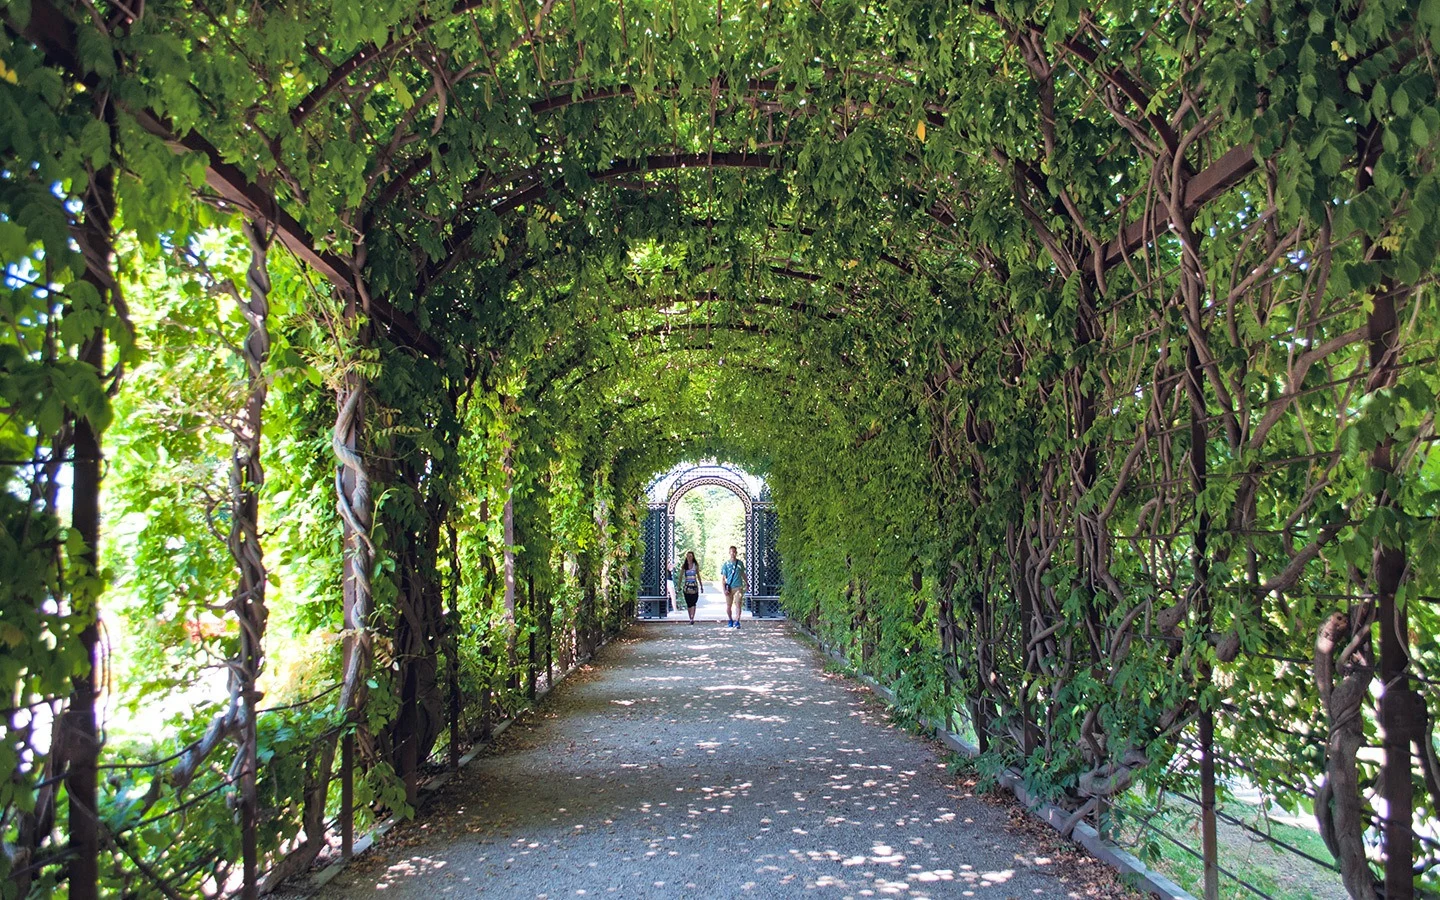 The Schonbrunn Palace gardens – free to enter if visiting in Vienna on a budget